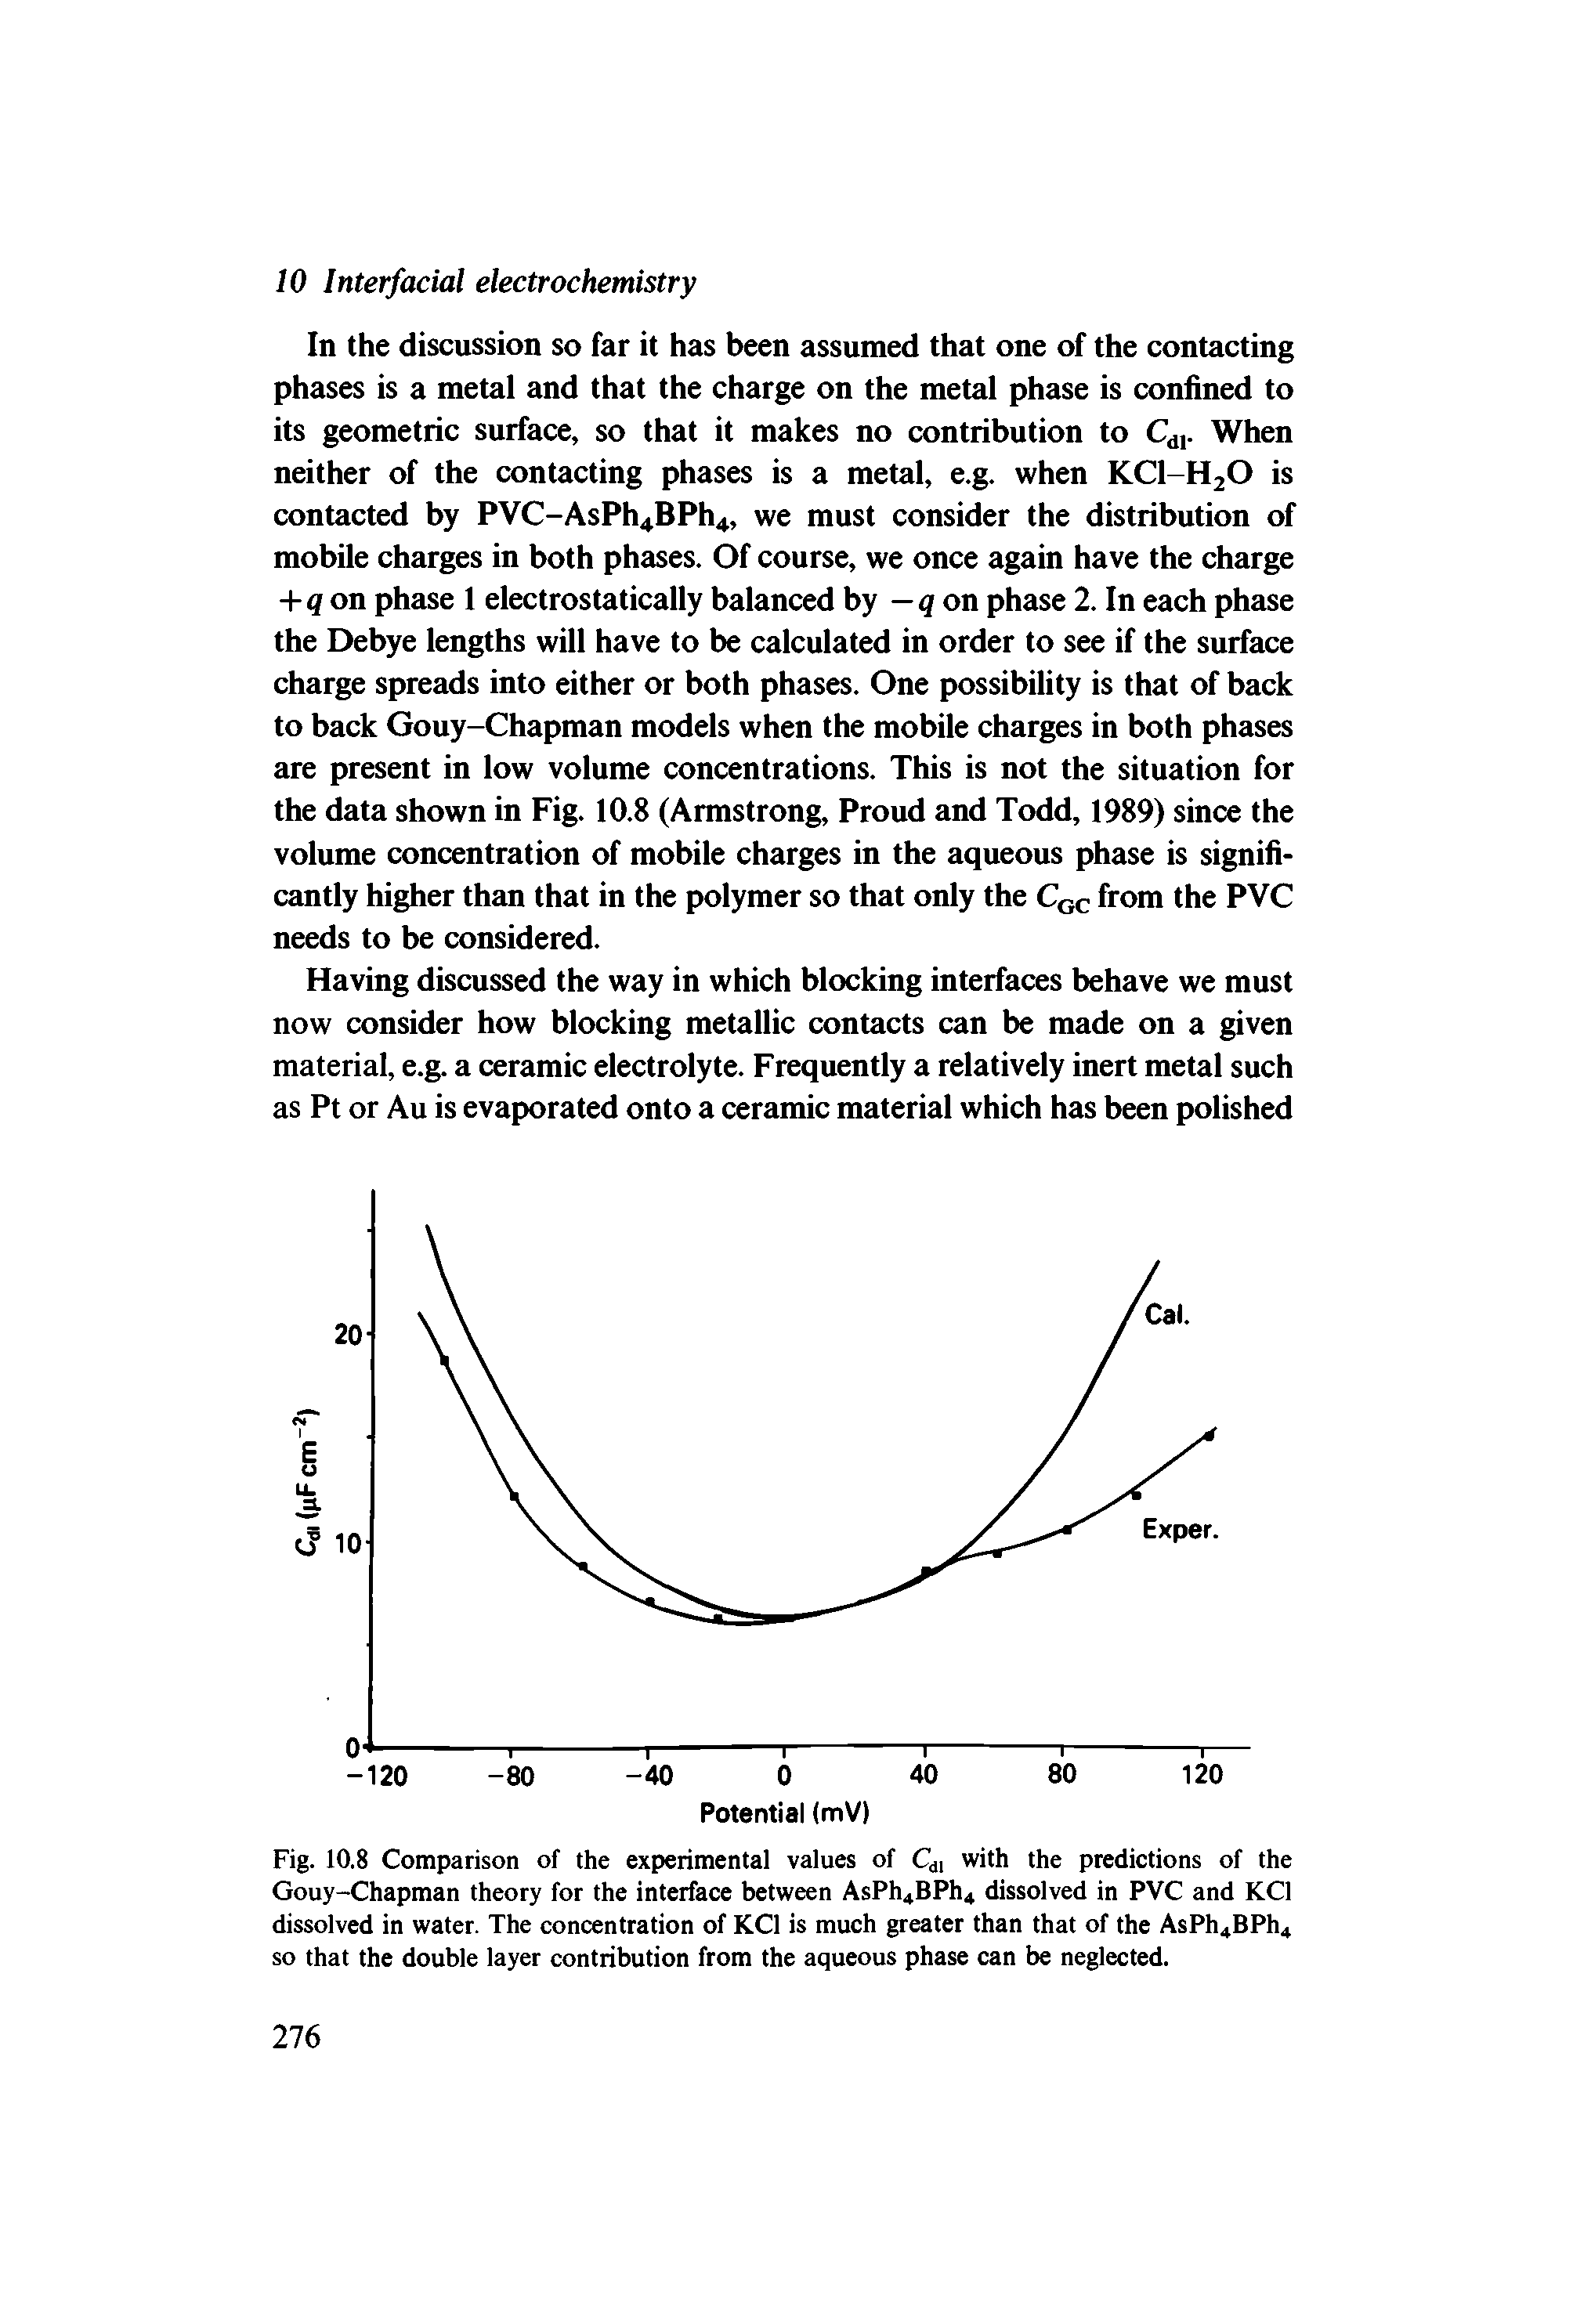 Fig. 10.8 Comparison of the experimental values of with the predictions of the Gouy-Chapman theory for the interface between AsPhiBPh dissolved in PVC and KCl dissolved in water. The concentration of KCl is much greater than that of the AsPhiBPhi so that the double layer contribution from the aqueous phase can be neglected.